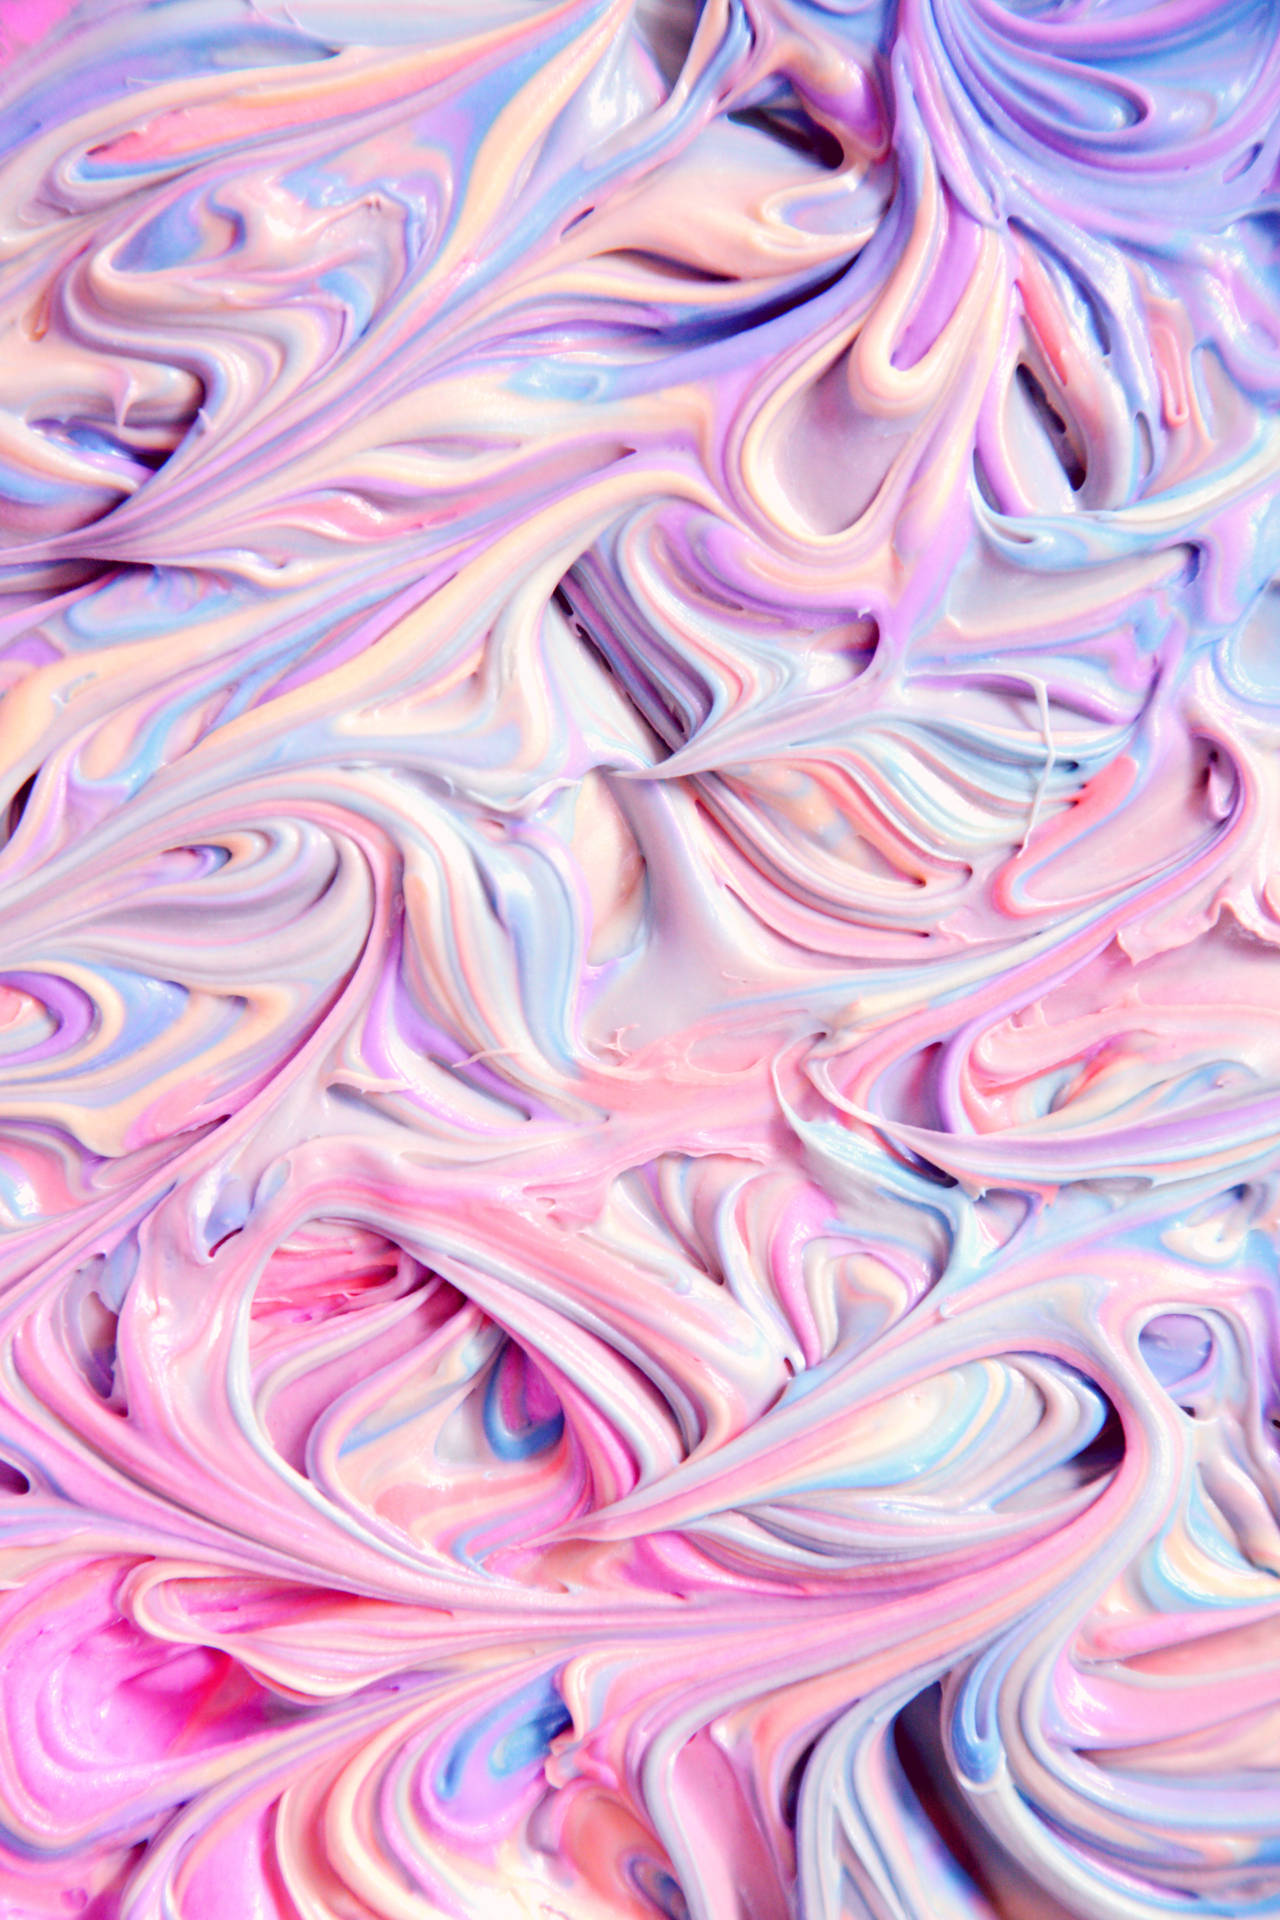 Pastel 3744X5616 Wallpaper and Background Image